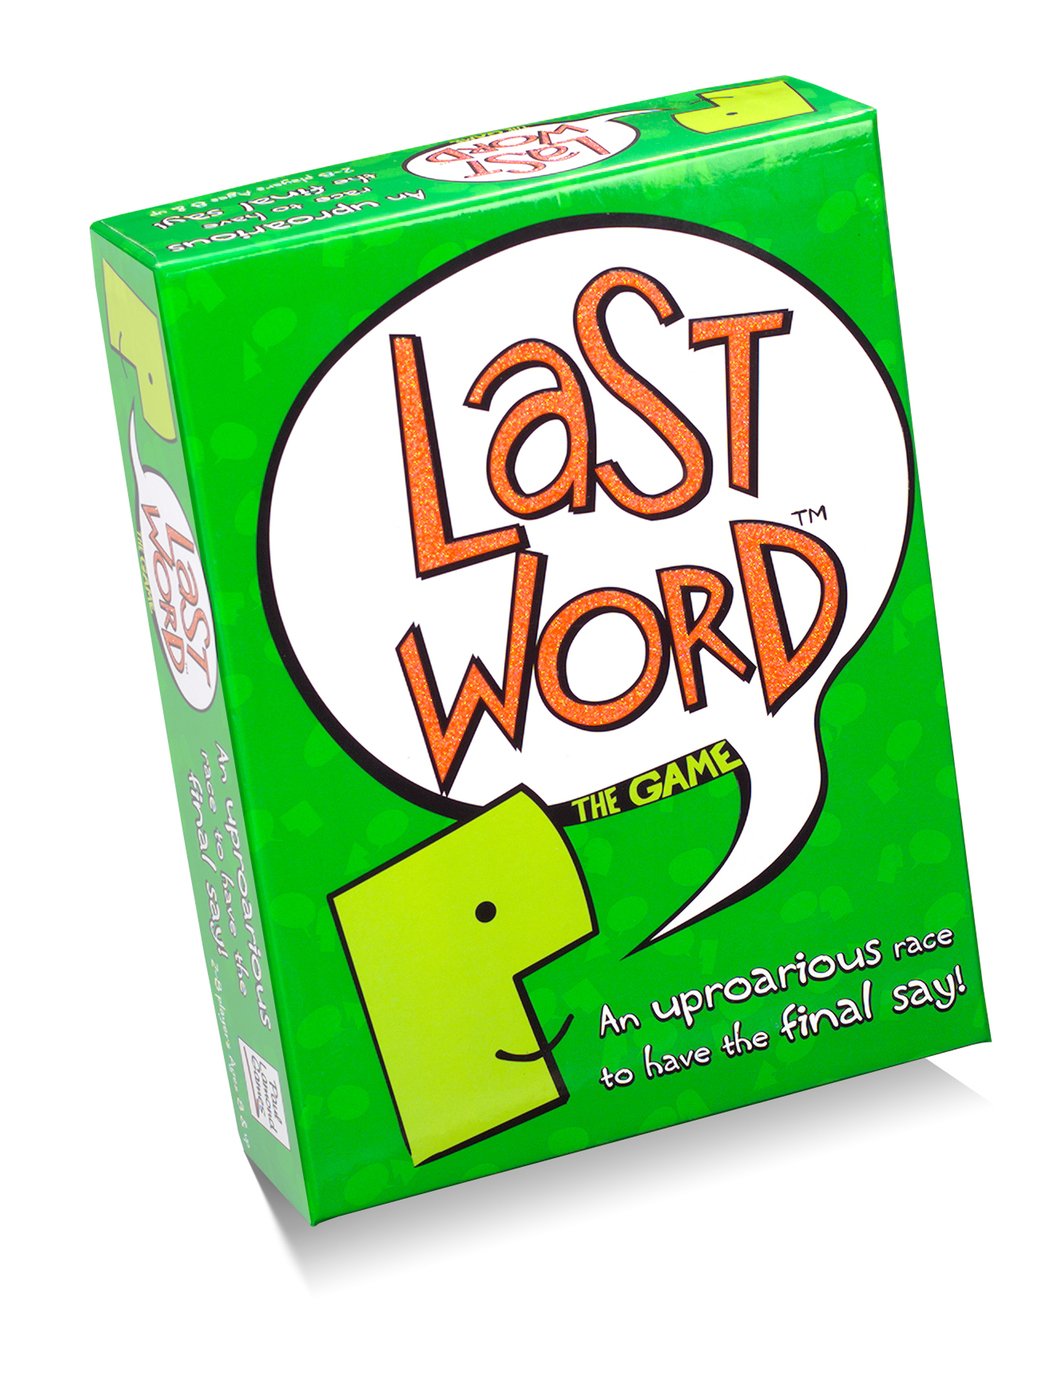 The Last Word Game Review